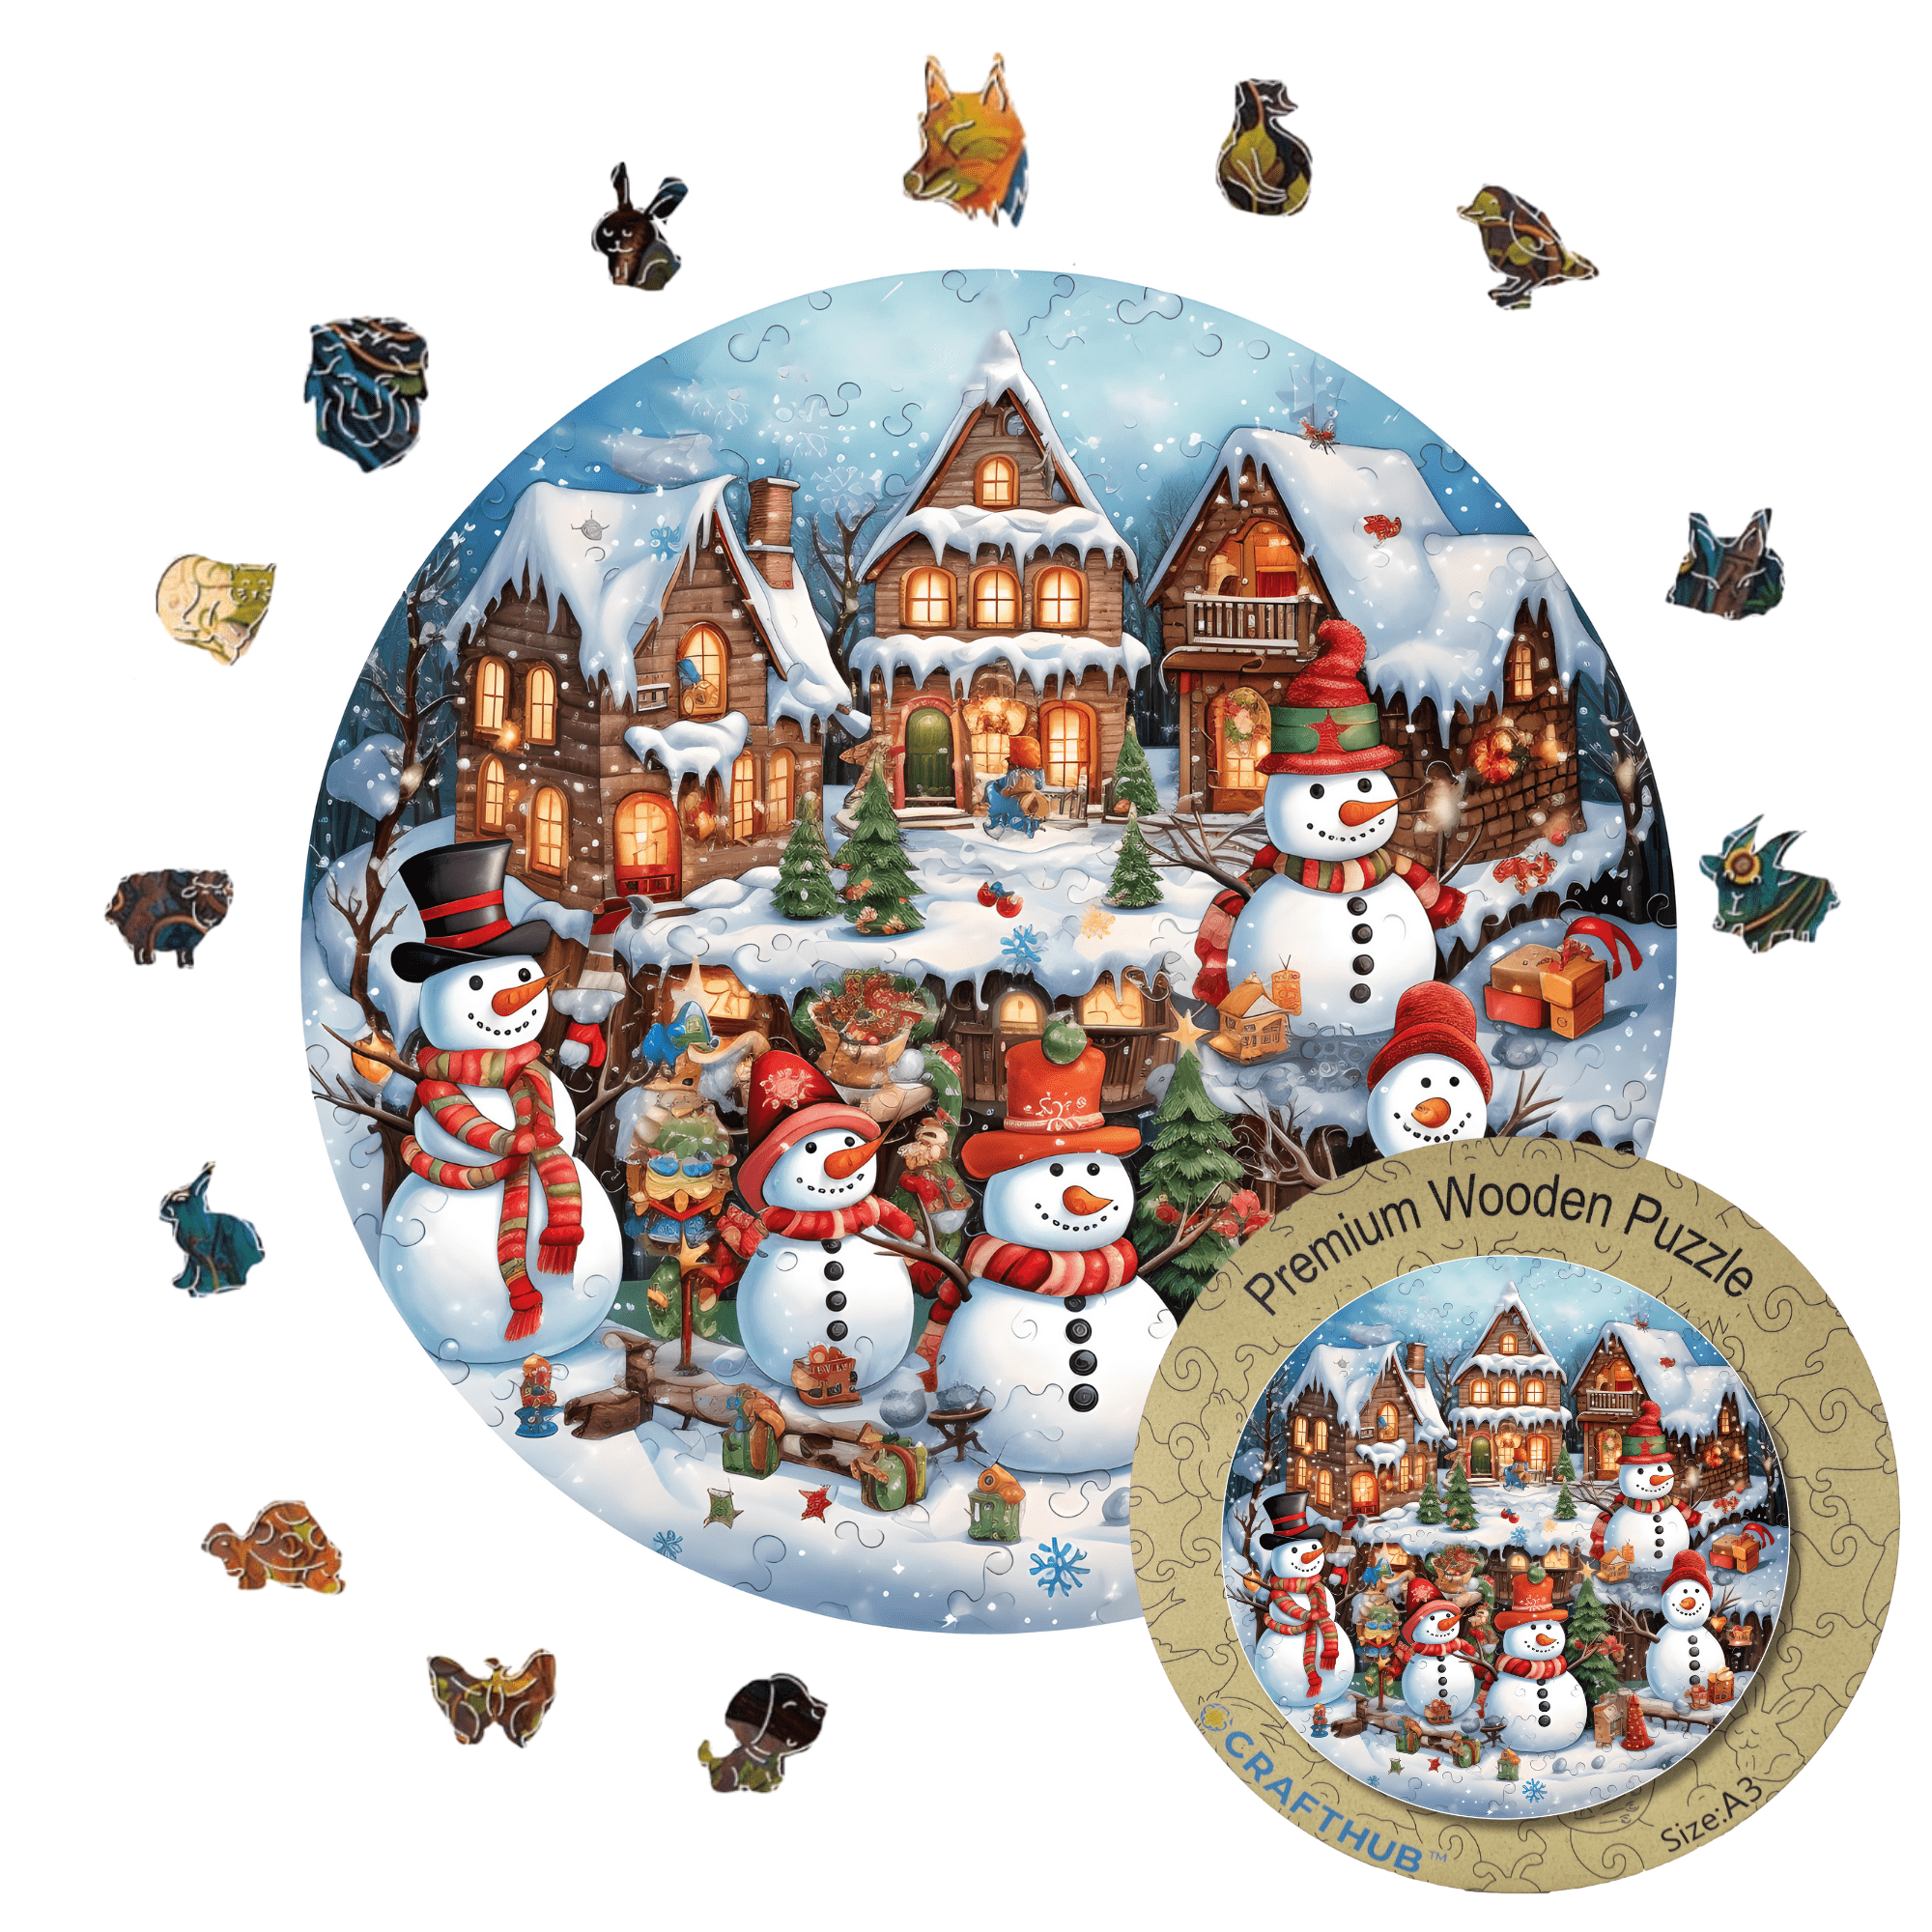 Animal Jigsaw Puzzle > Wooden Jigsaw Puzzle > Jigsaw Puzzle A3+Wooden Box Snowman - Jigsaw Puzzle